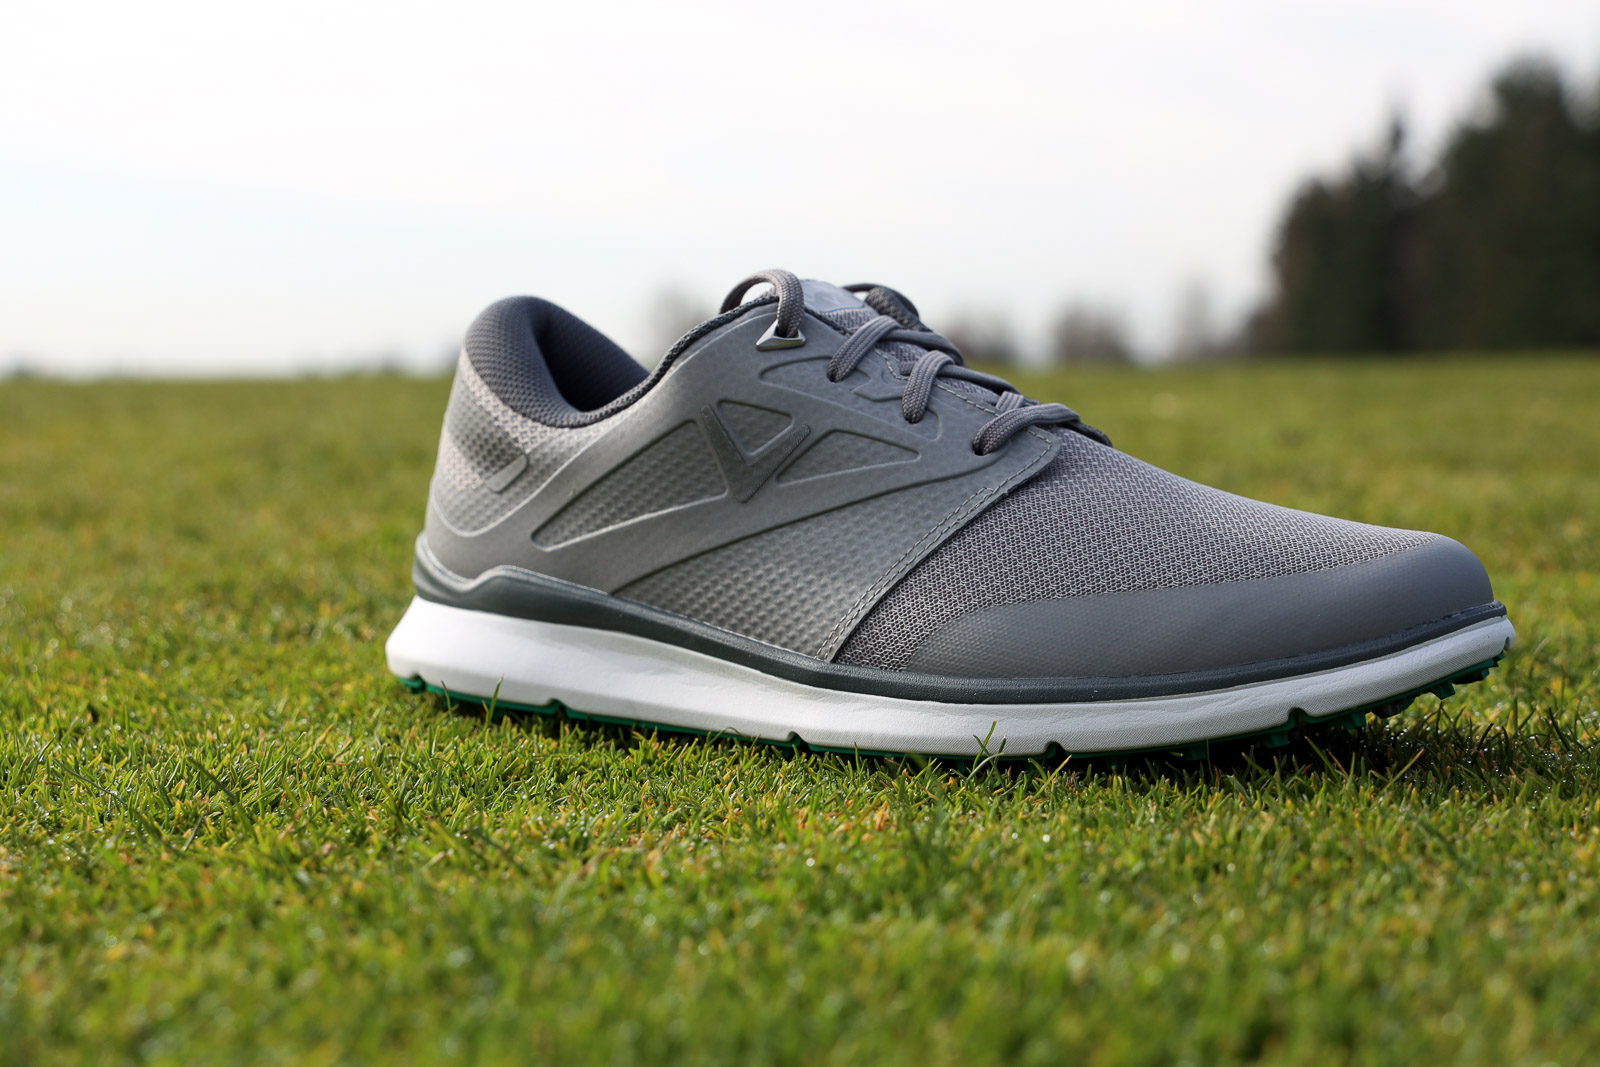 Callaway Golf Shoes: Is the Oceanside the Next Great Spikeless Shoe?